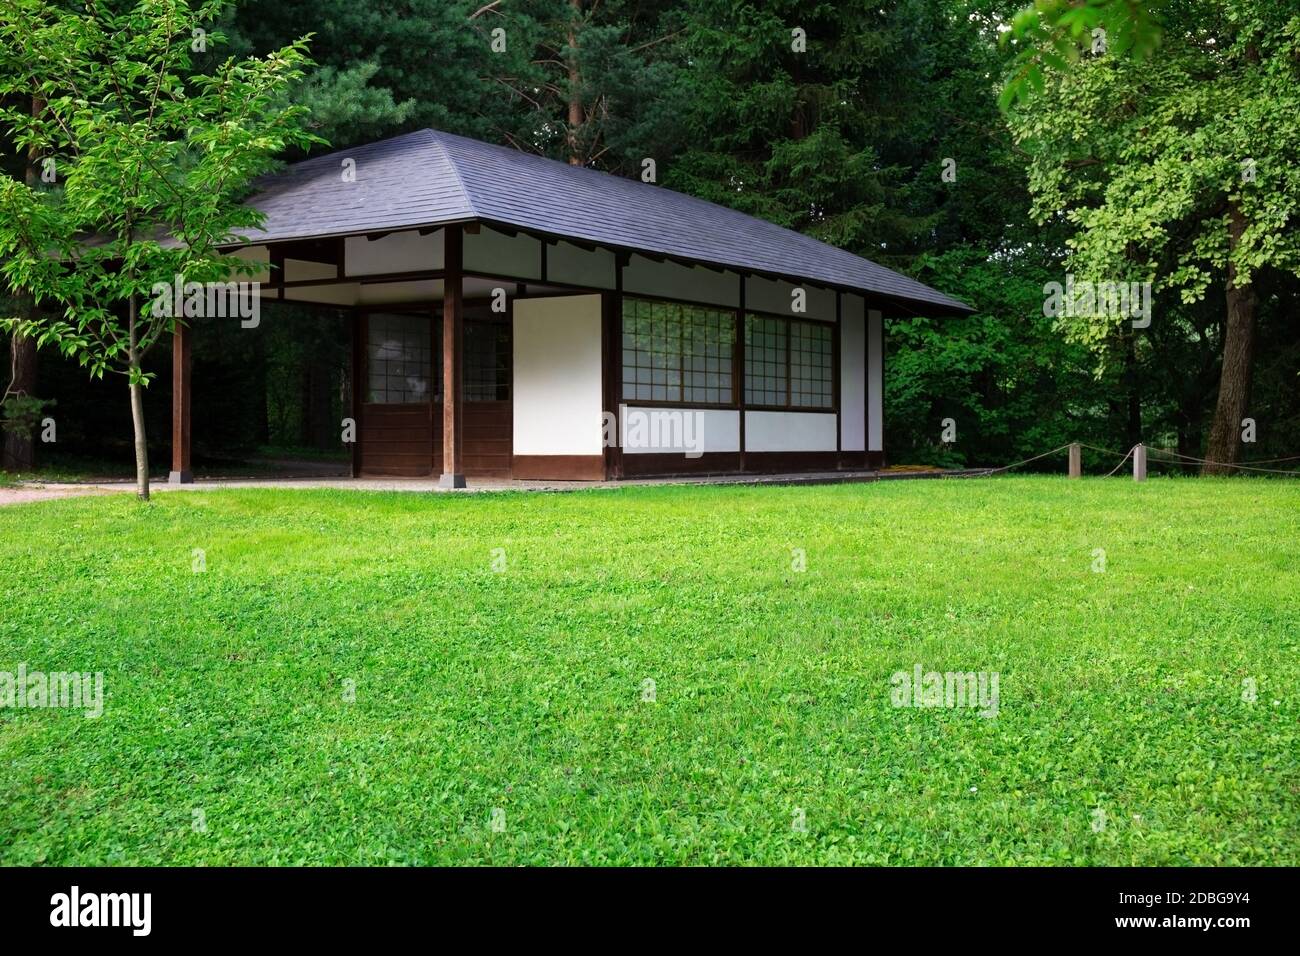 Traditional Japanese architecture.The facade of a small traditional Japanese house among trees, a garden and a green lawn. Wooden Japanese house Stock Photo